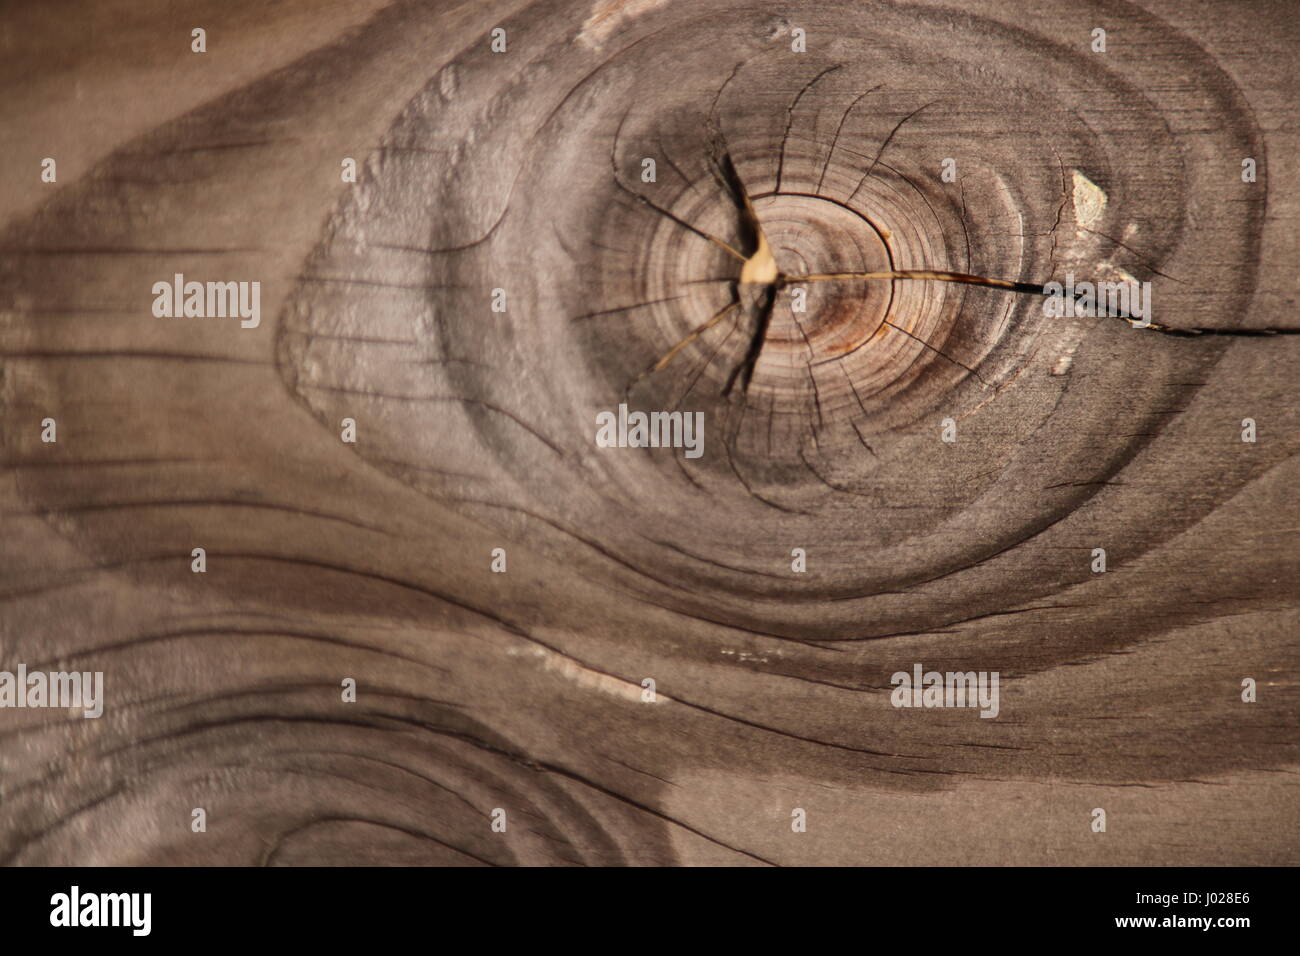 wood structure with knothole Stock Photo